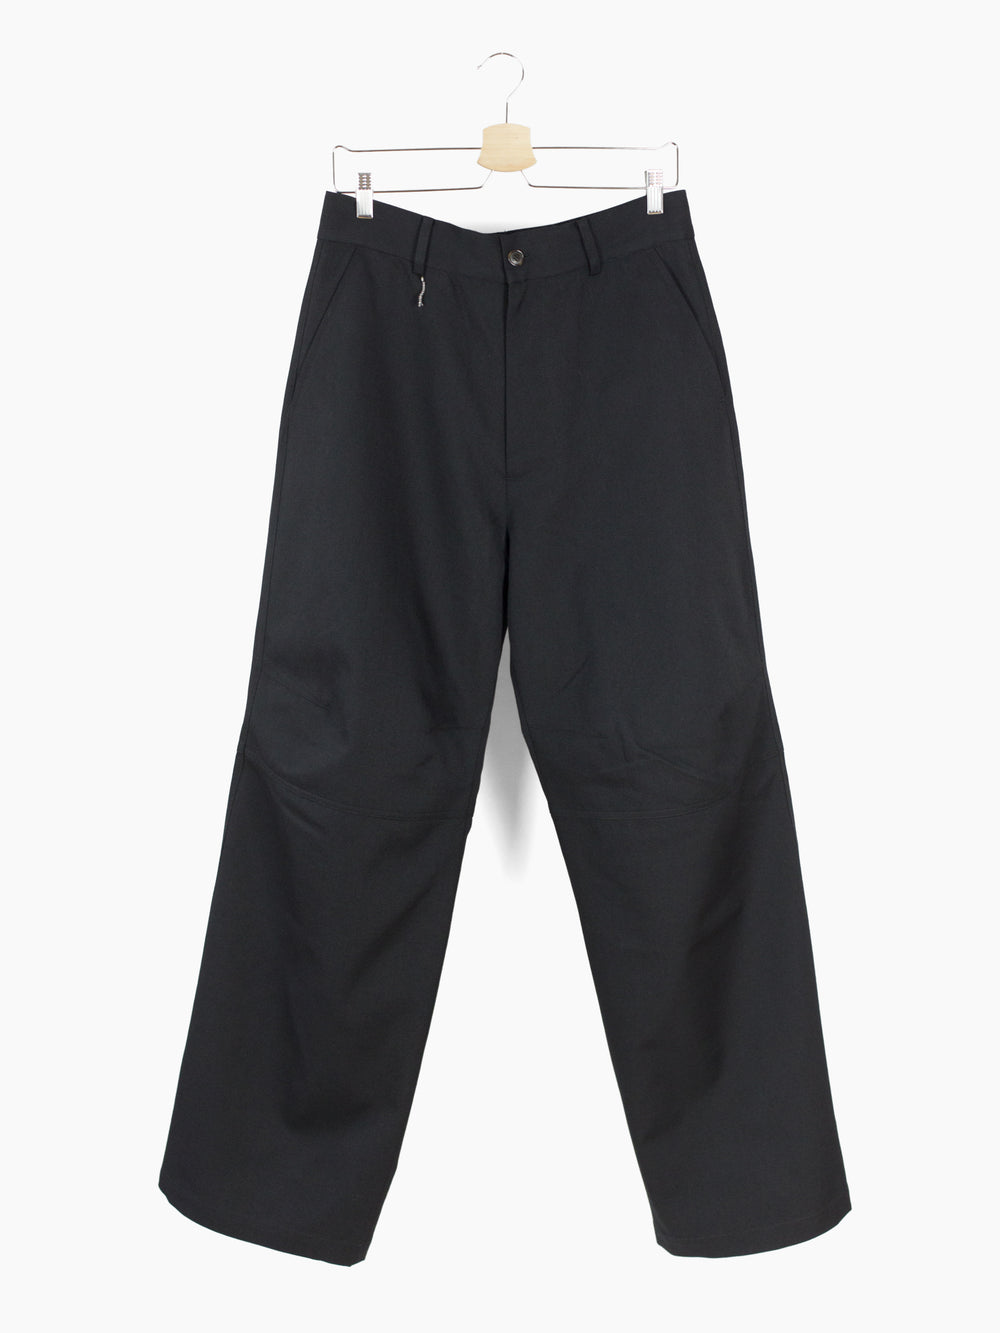 Les Six AW23 Articulated Trousers